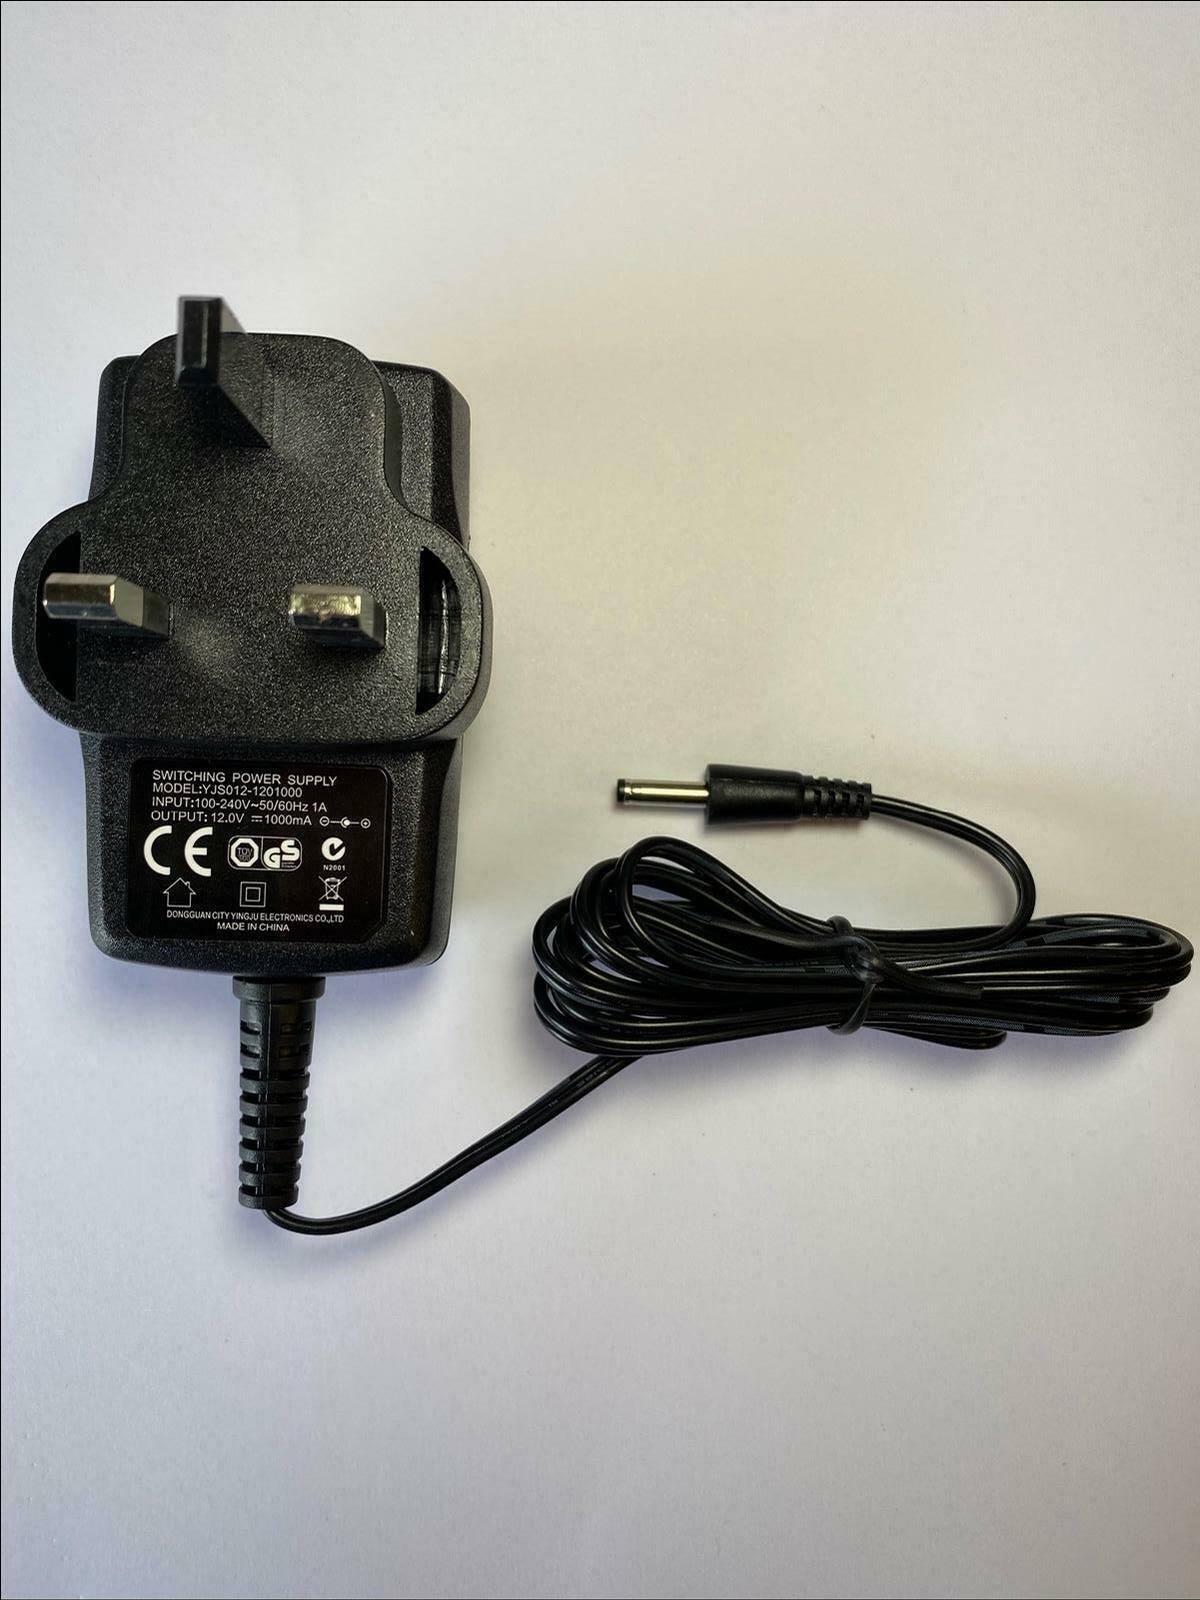 Replacement 12V AC-DC Adaptor for DIALL (AE0295) Rechargeable LED Light Voltage: 12V EAN: 5056693